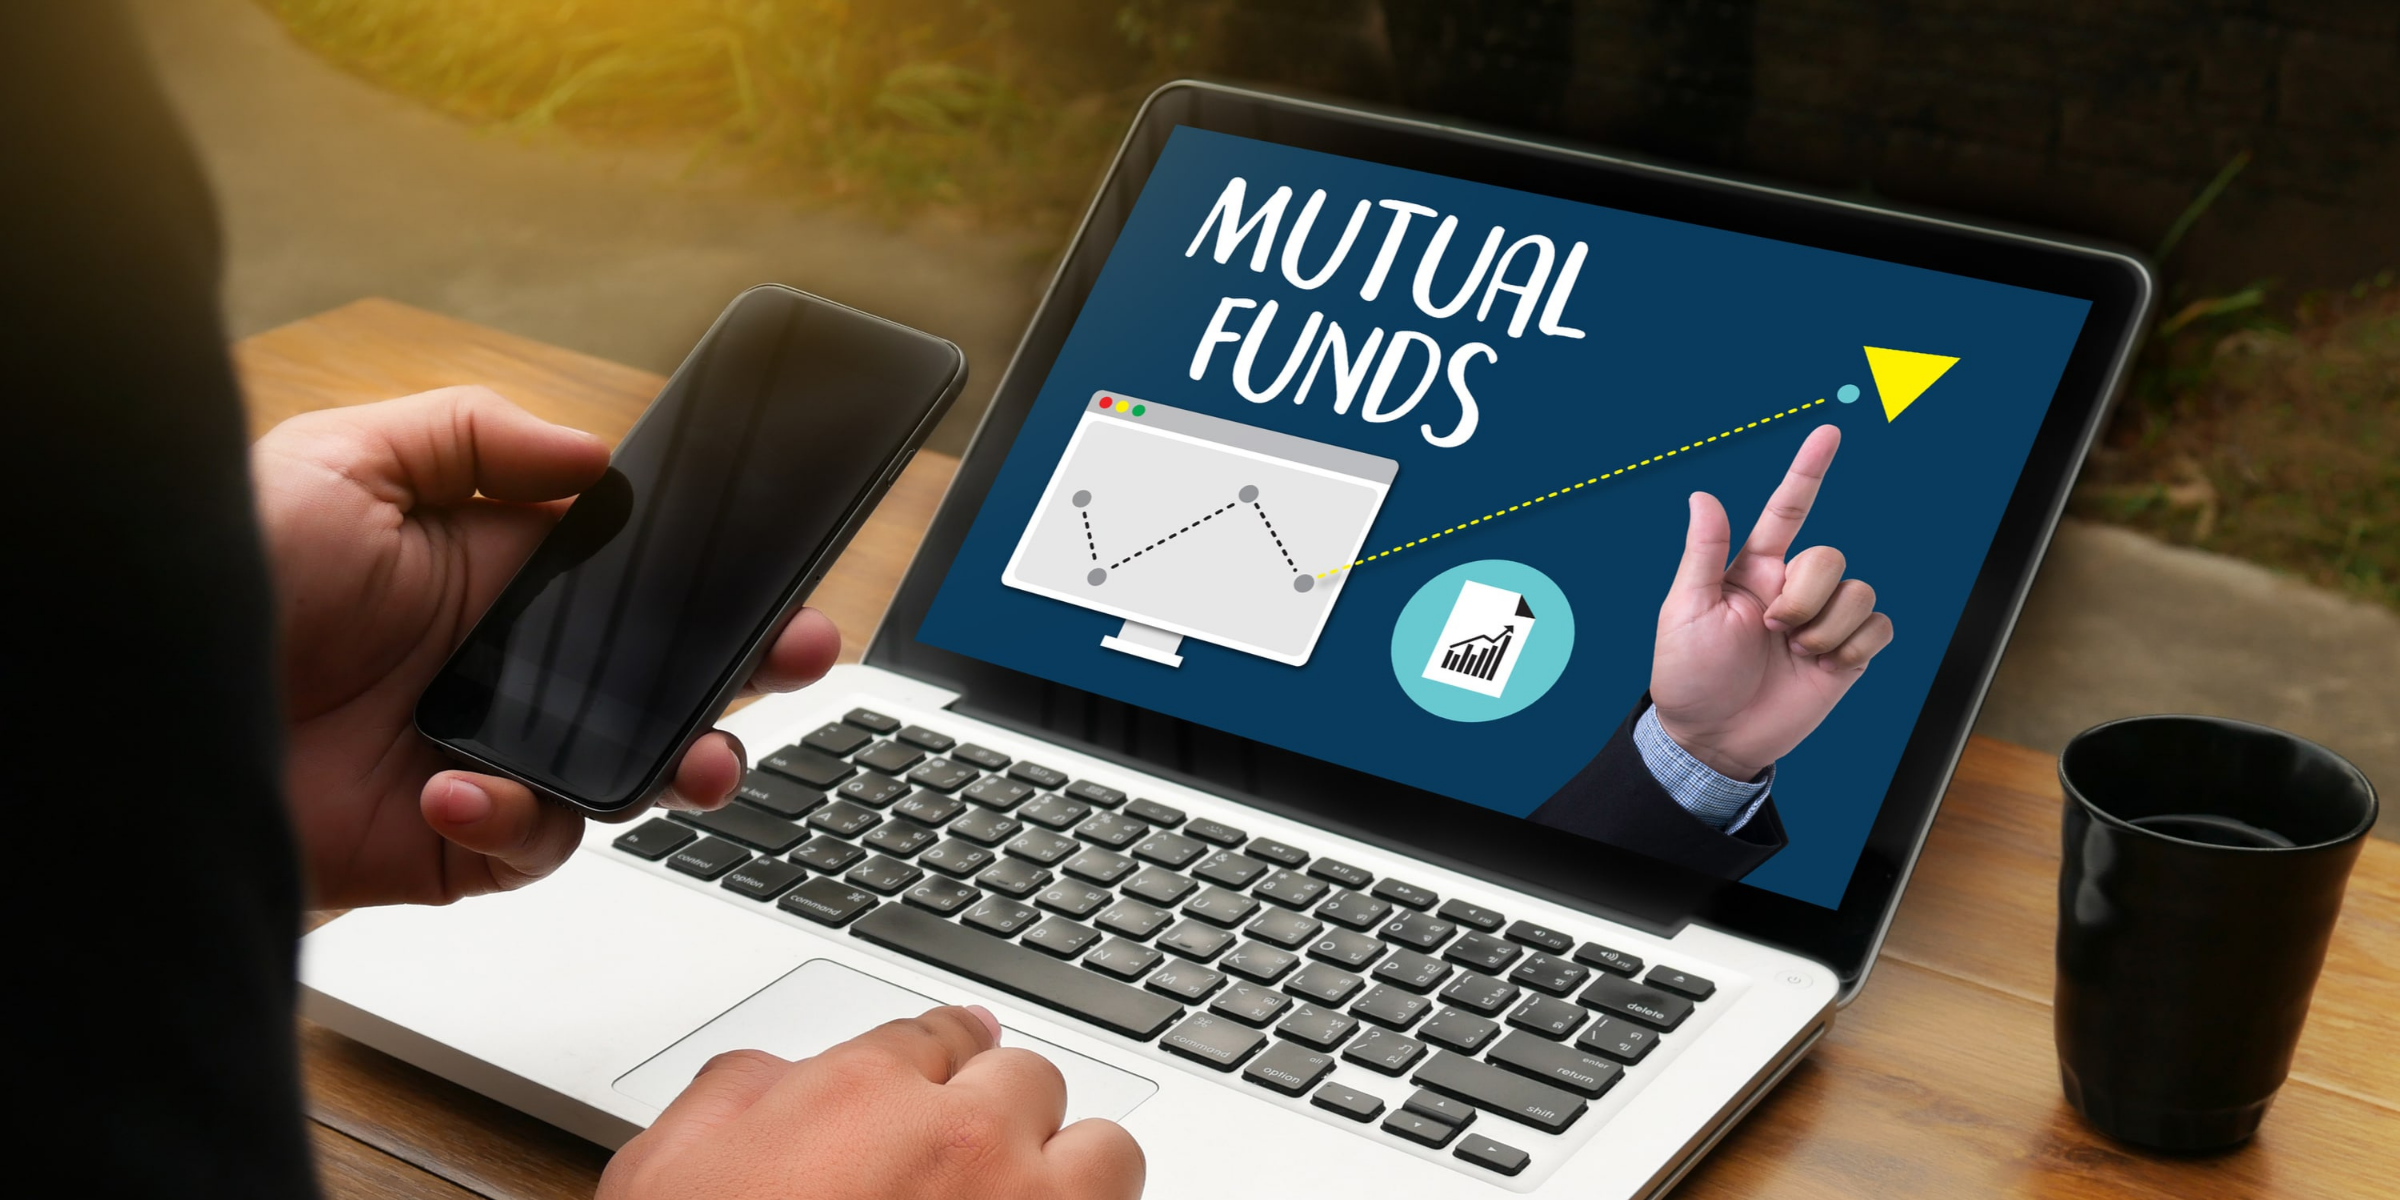 5 Things to Do When Losing Money in Mutual Funds